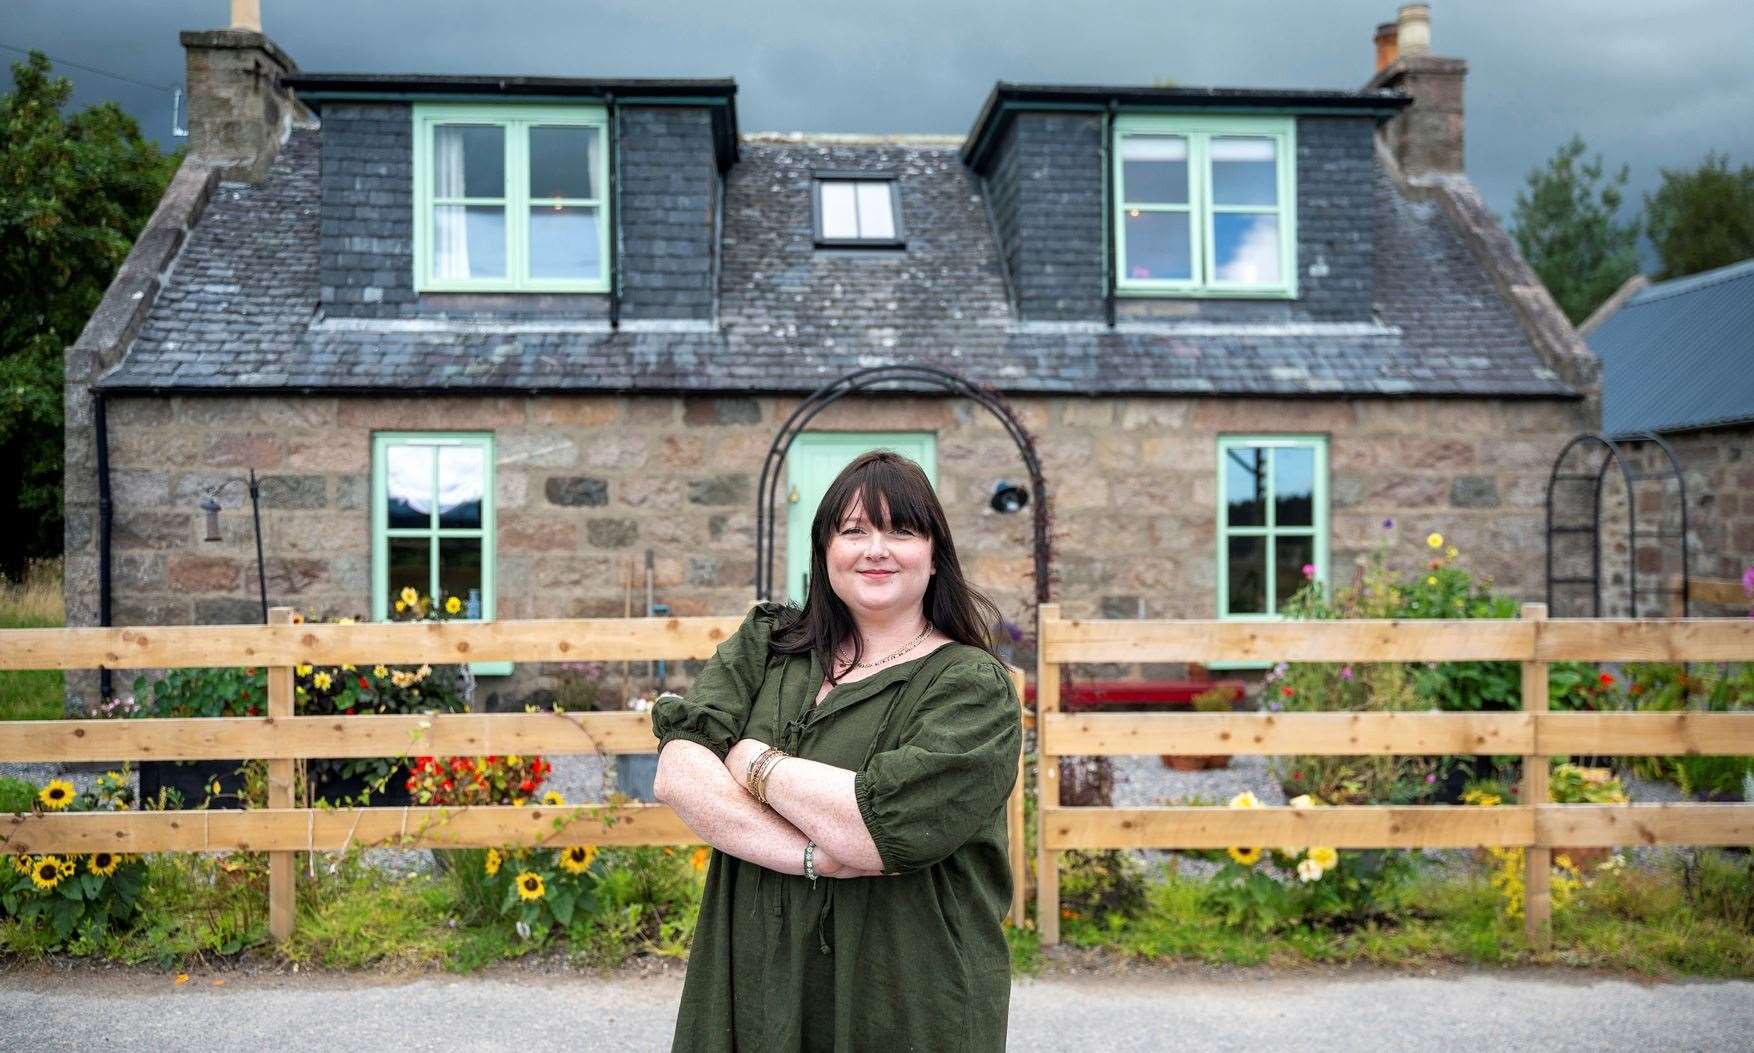 Homeowner Rachel outside Quiney Cottage, Banchory. ,Quiney Cottage is a traditional farmhouse cottage, dating back to the 1860s. Home to Rachel and her cat Drizzy, the home is a postcard-perfect Scottish cottage bursting with personality.. Picture: IWC Media,Michael Traill